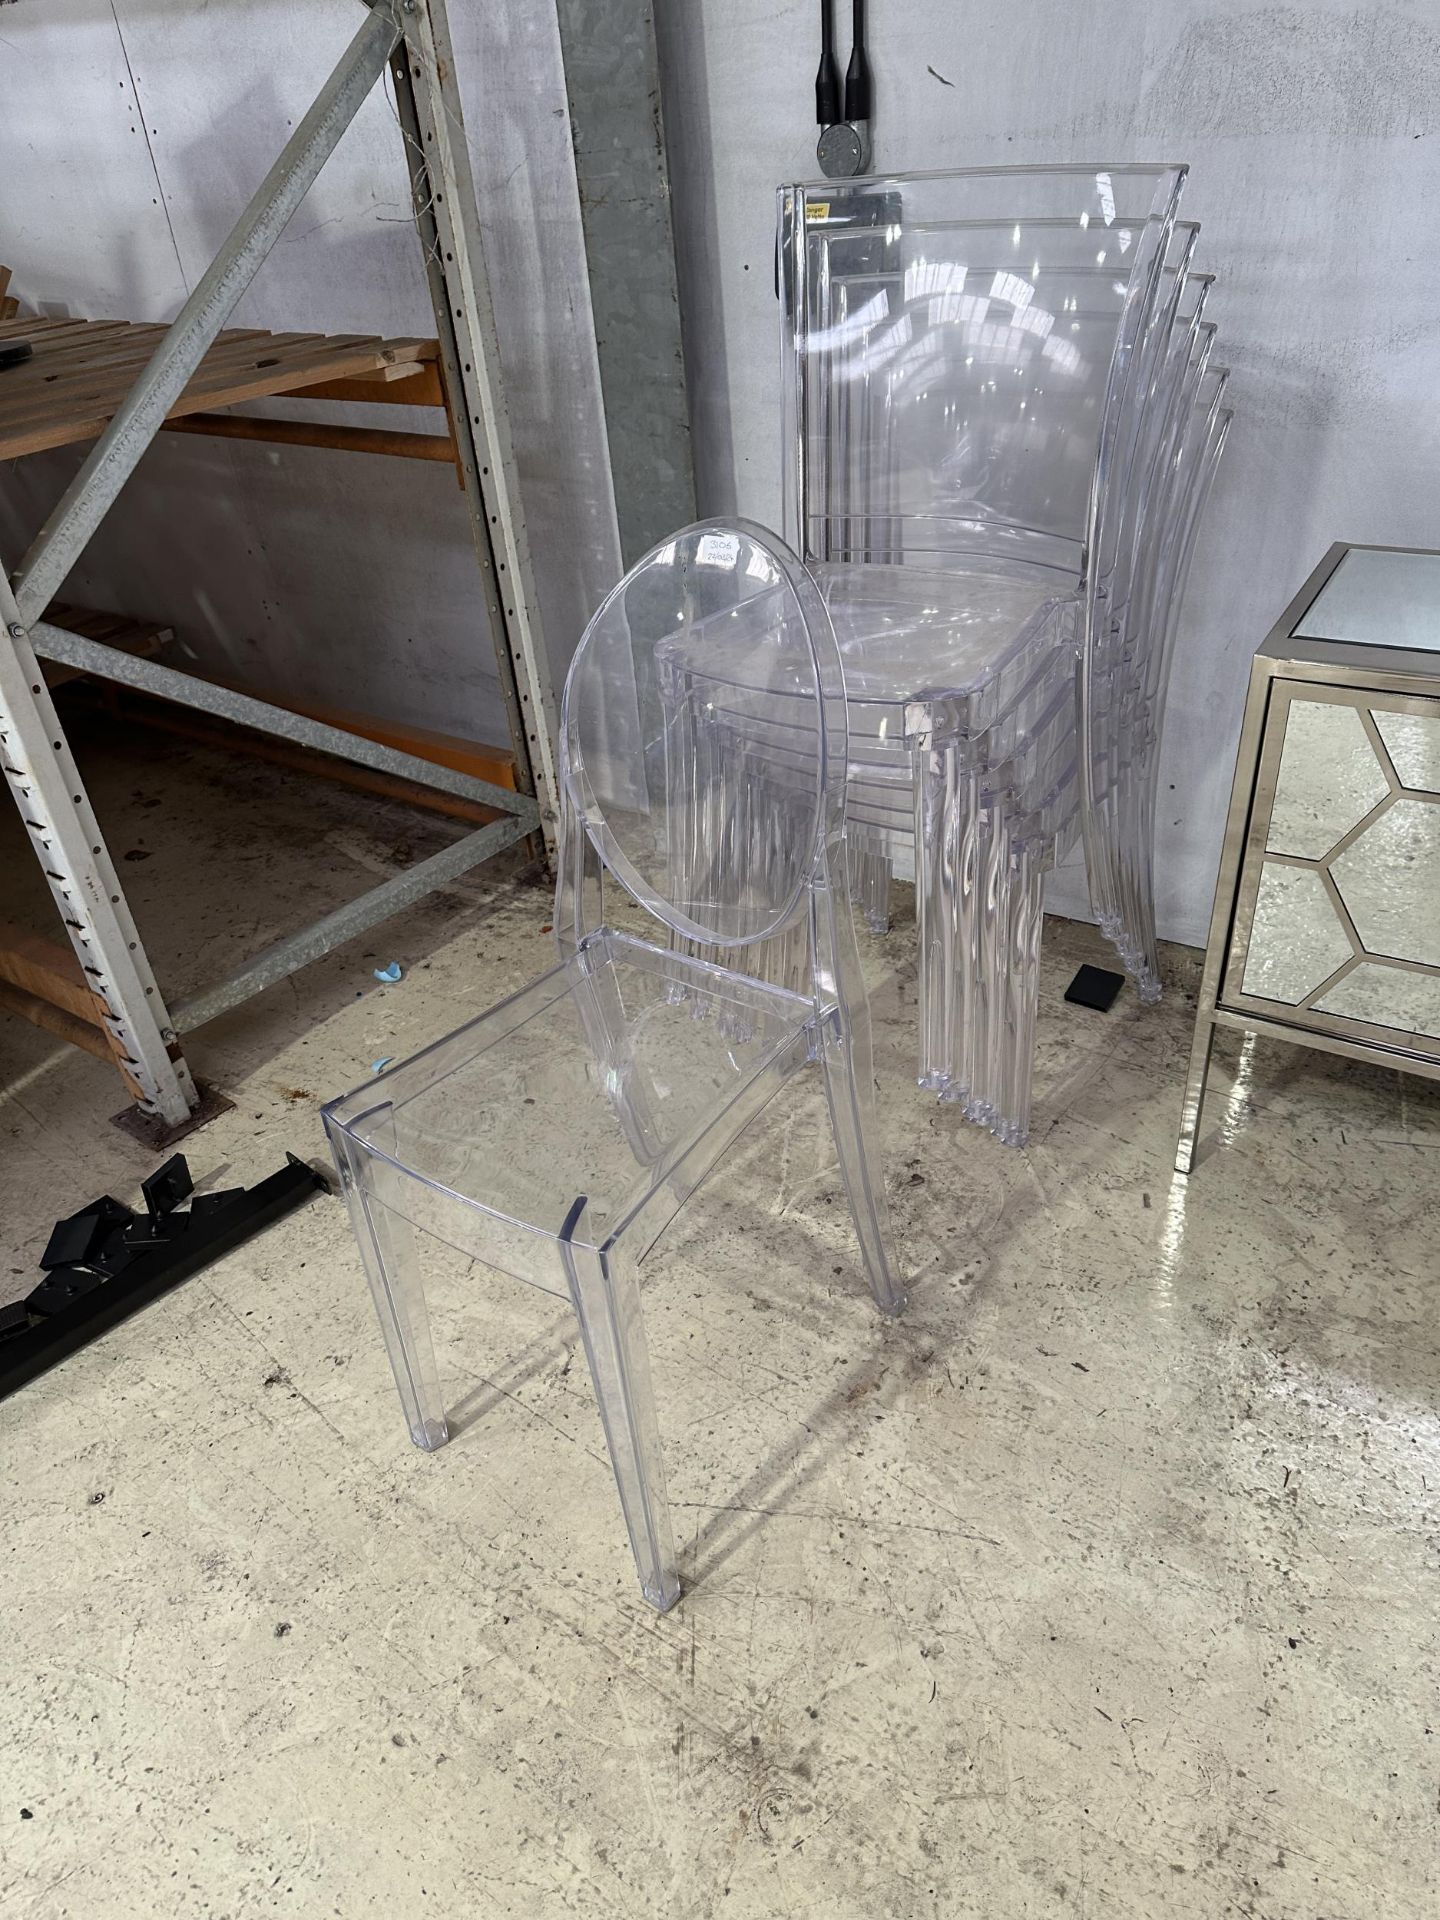 SEVEN MODERN CLEAR PLASTIC STACKING CHAIRS (FROM A DEVELOPER'S SHOW HOME - BELIEVED UNUSED)